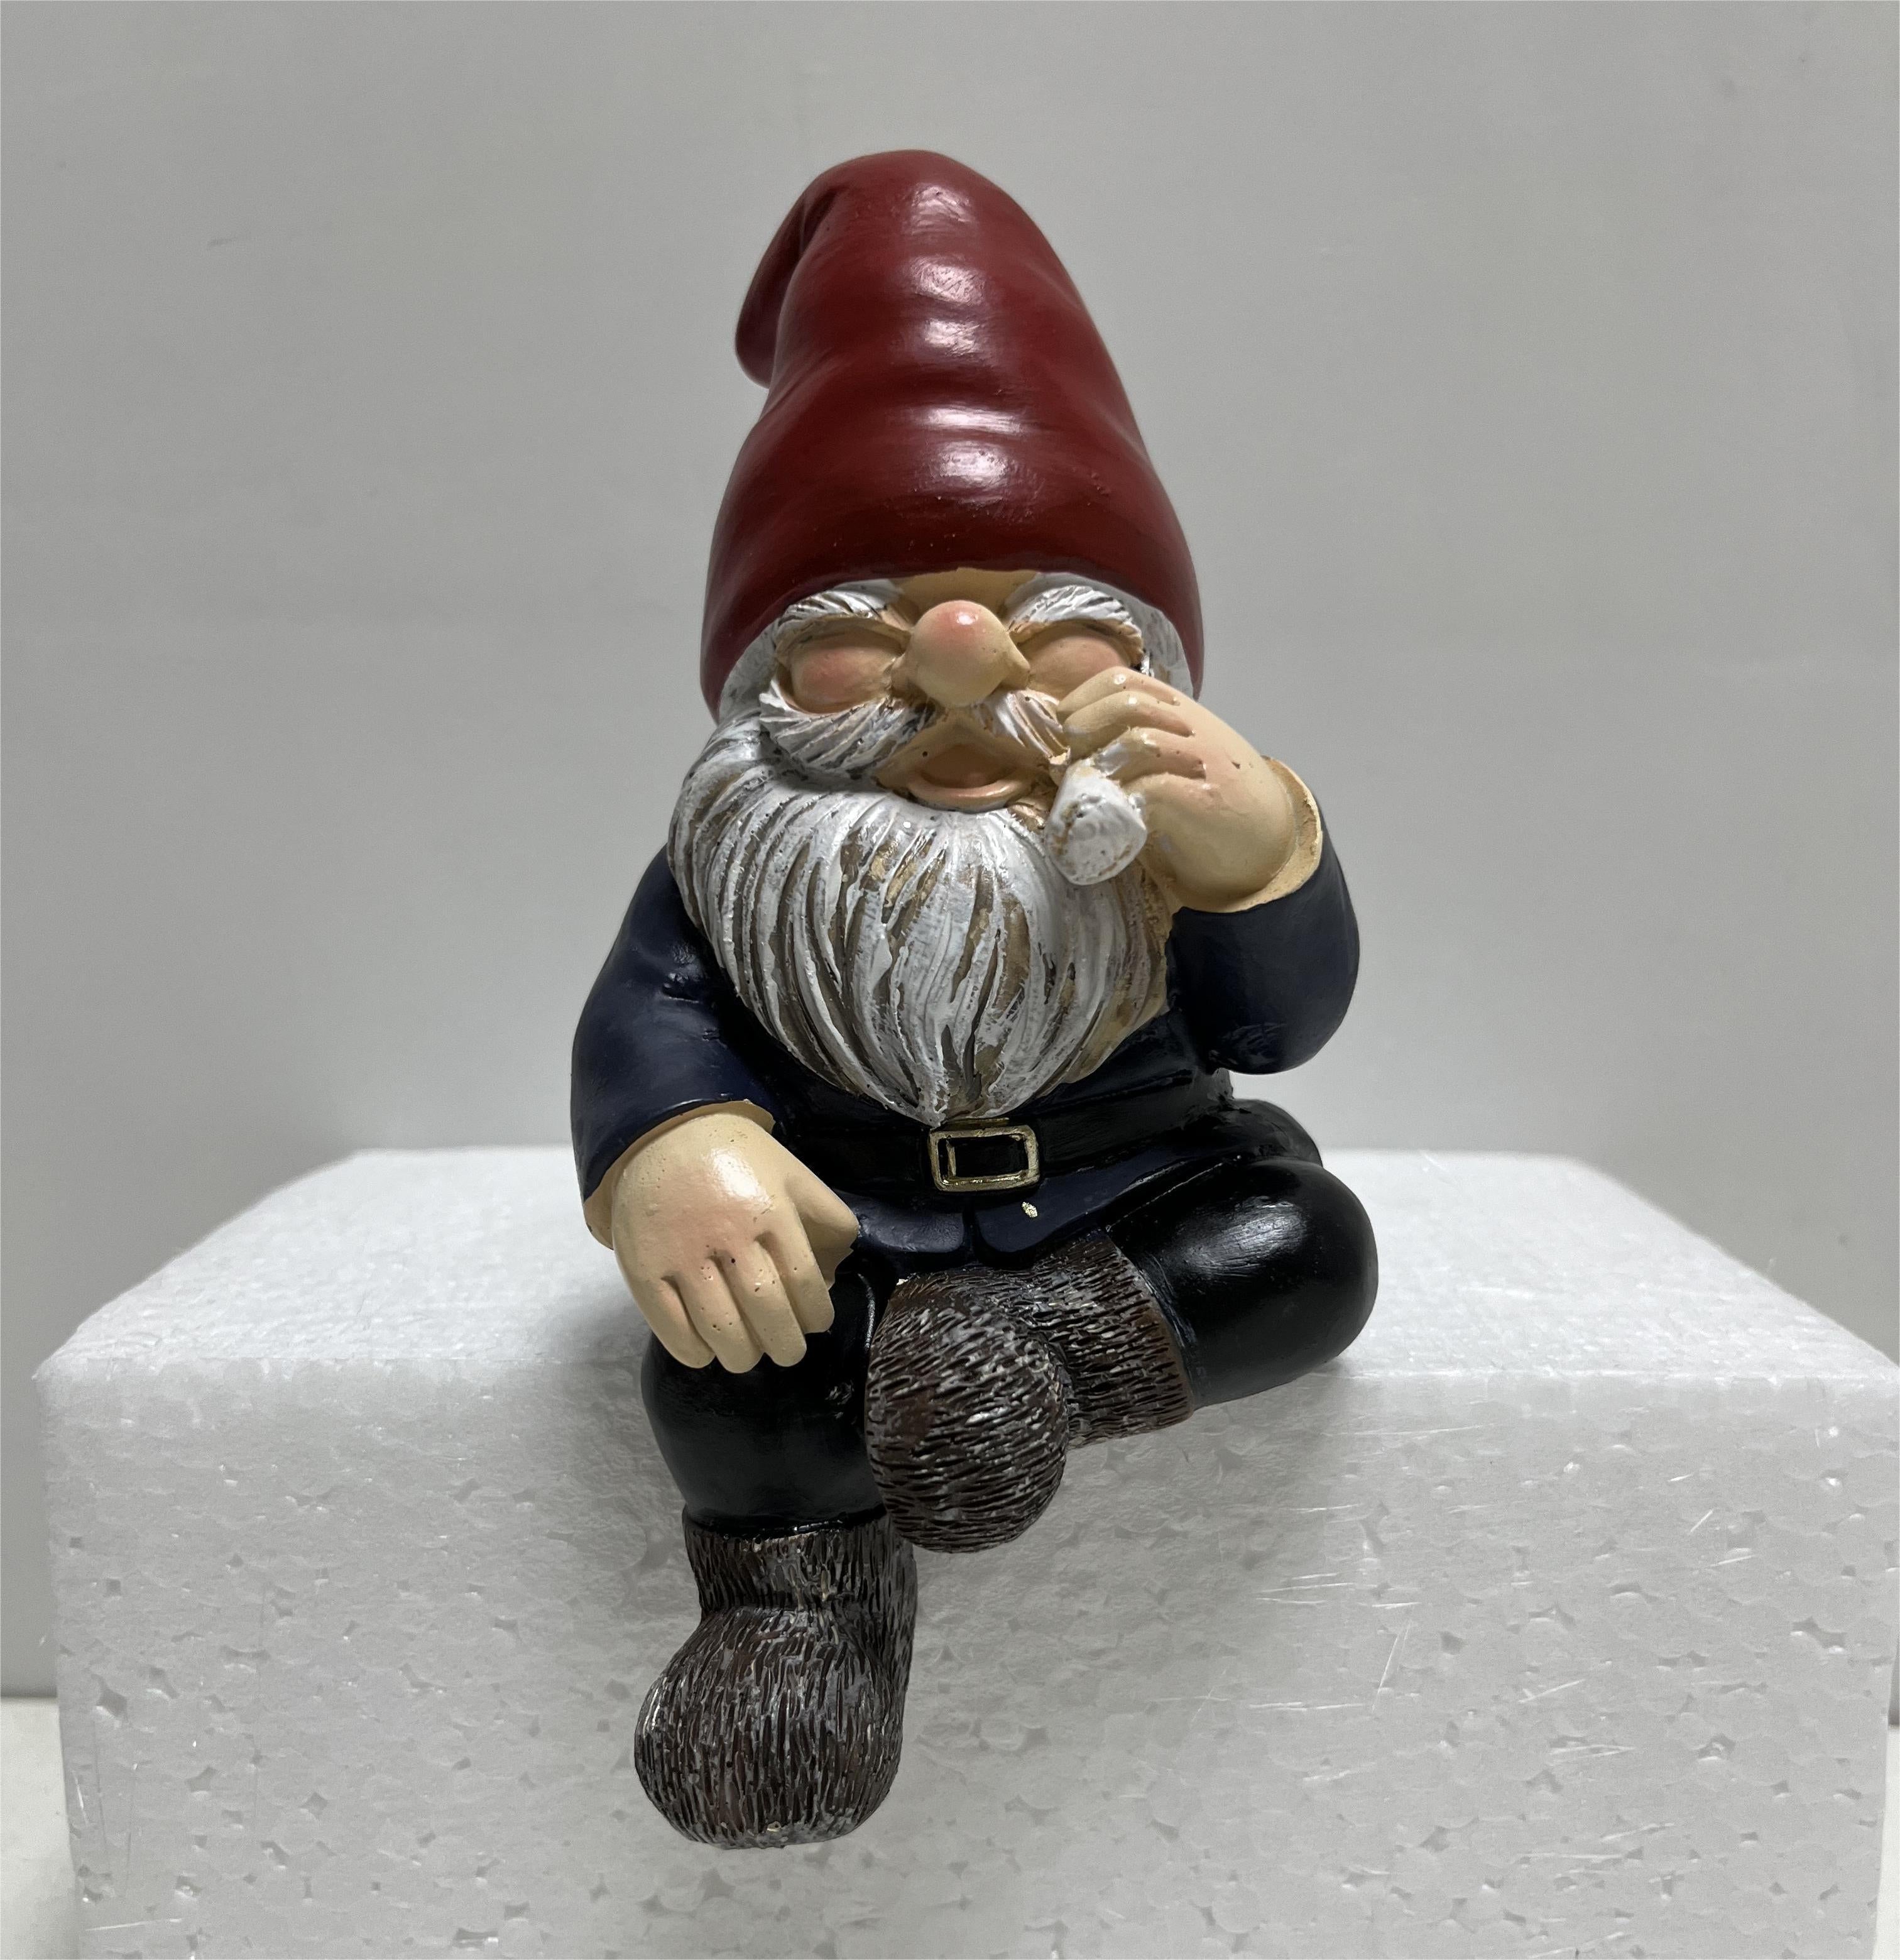 Funny Smoking Old Man, Outdoor and Indoor Christmas decorations Items, Christmas ornaments, Christmas tree decorations, salt dough ornaments, Christmas window decorations, cheap Christmas decorations, snowmen, and ornaments.